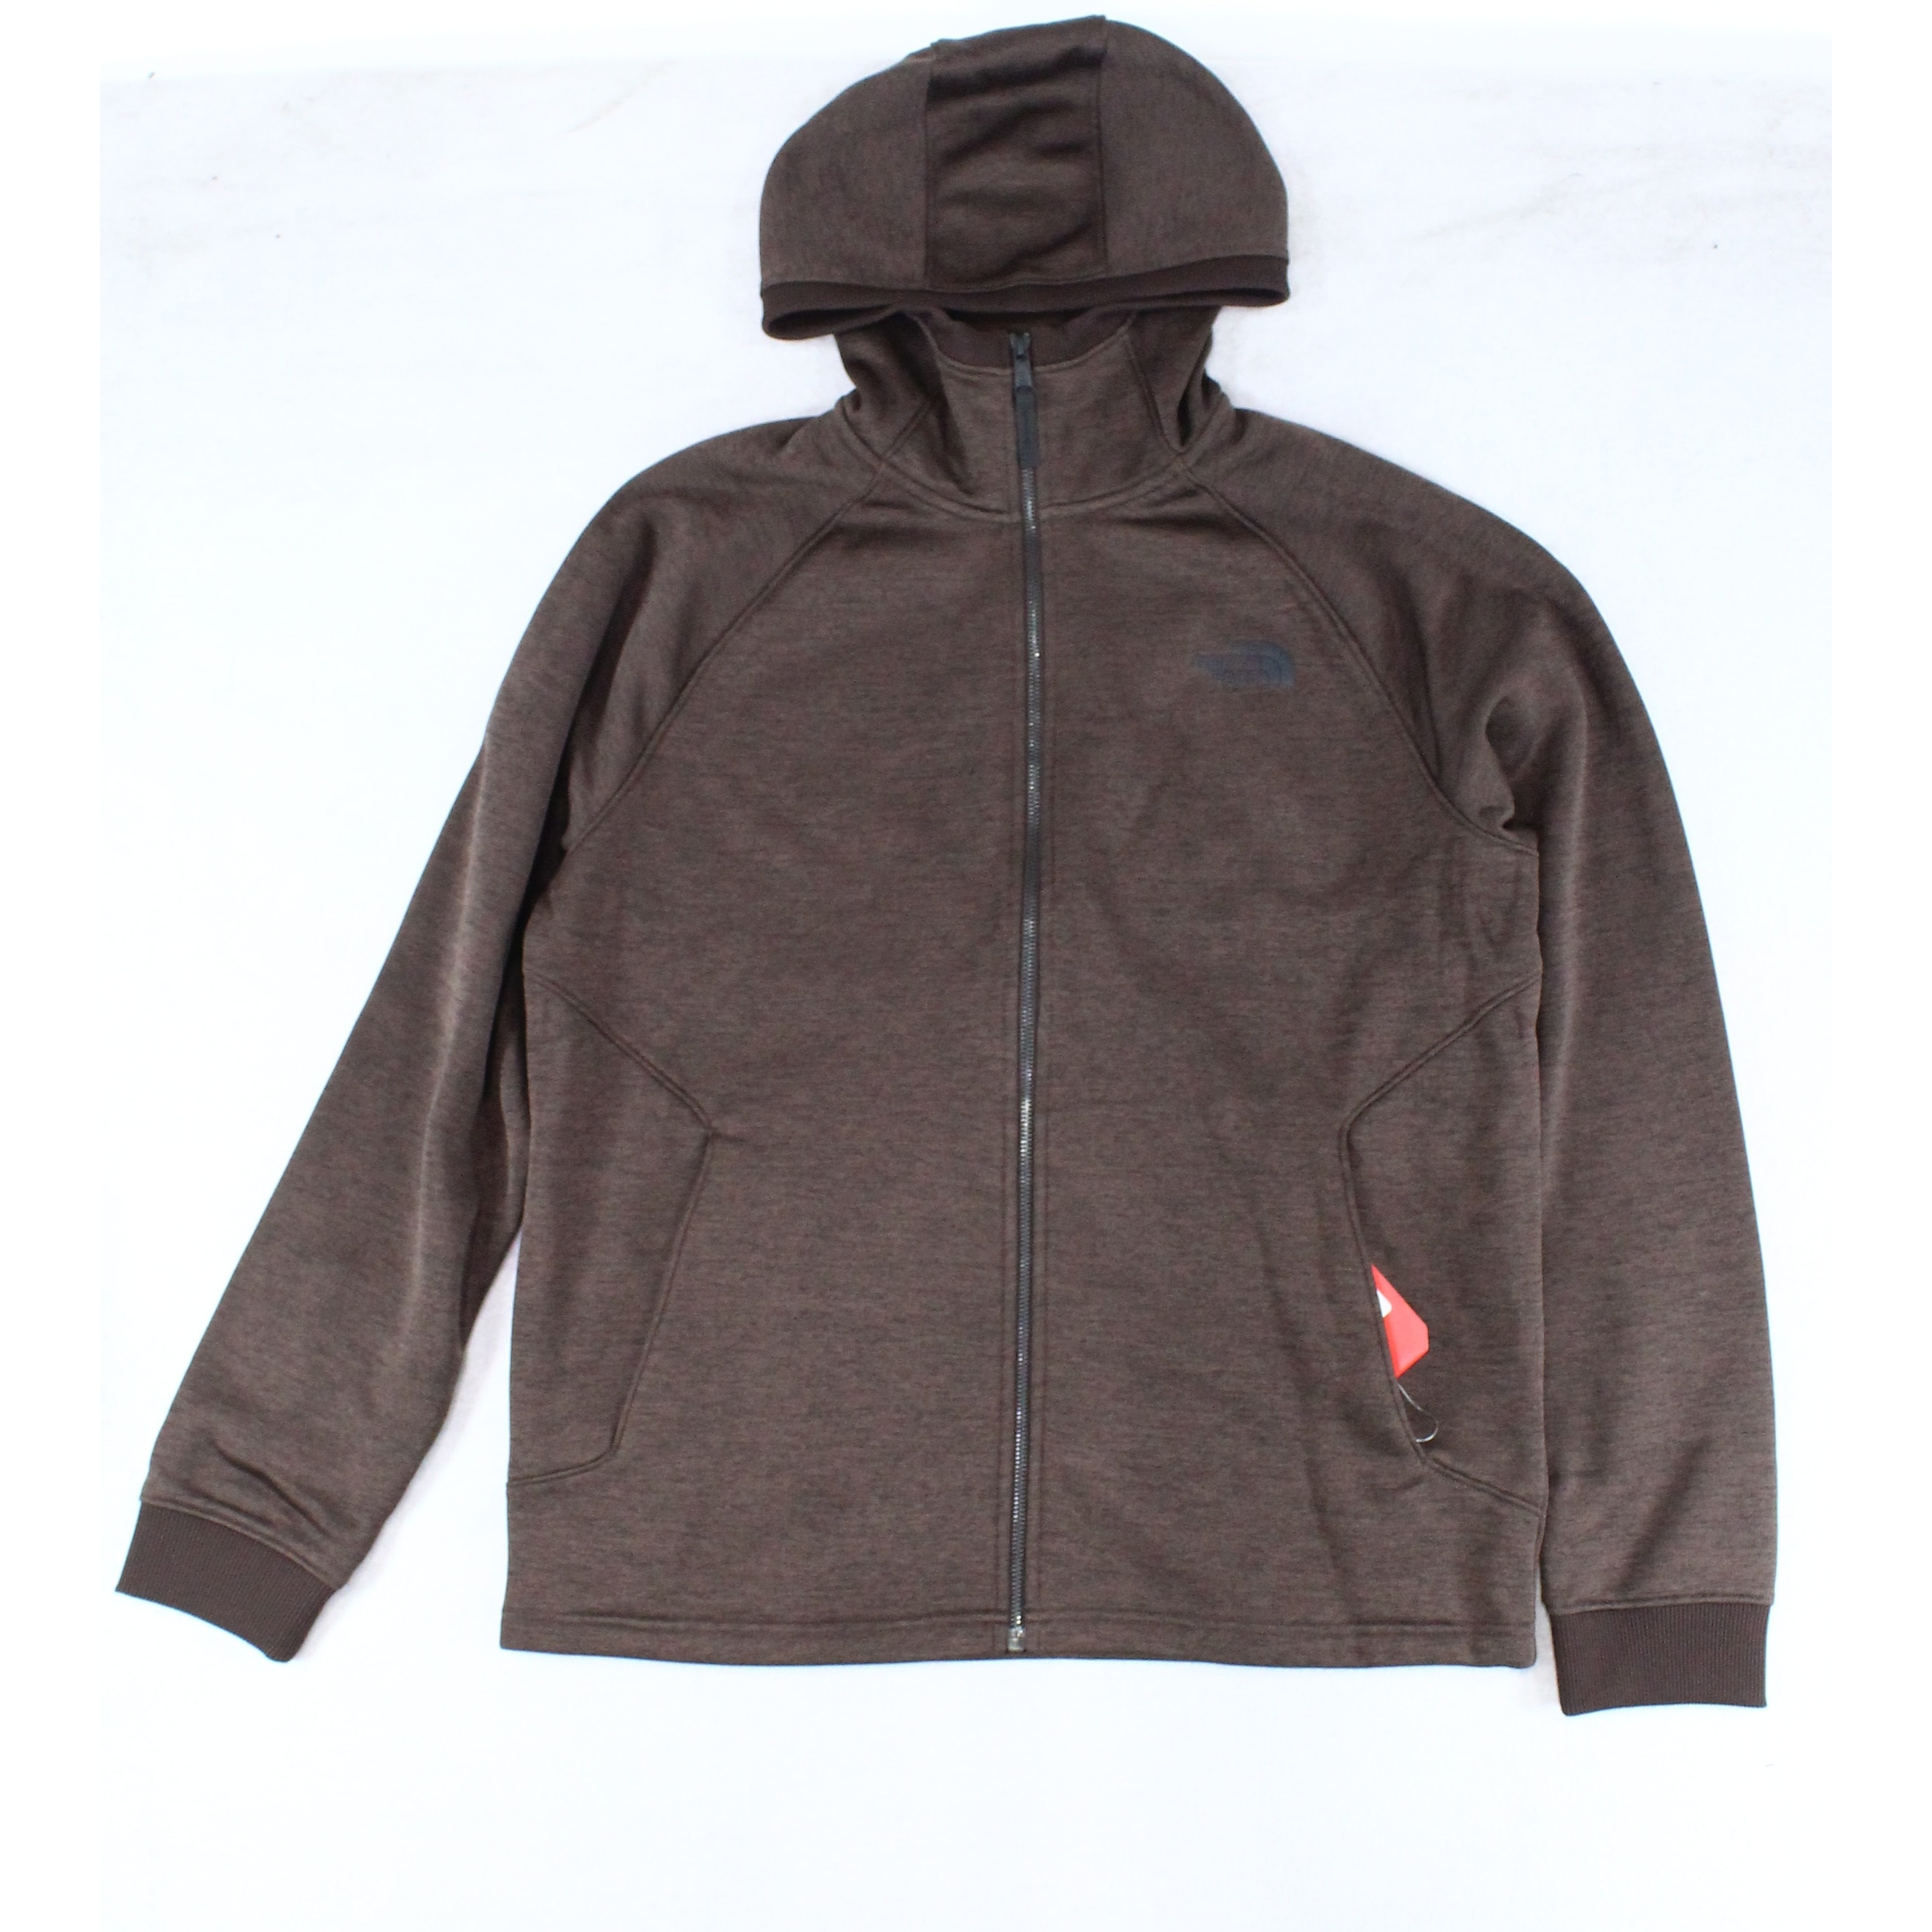 north face jackets on sale